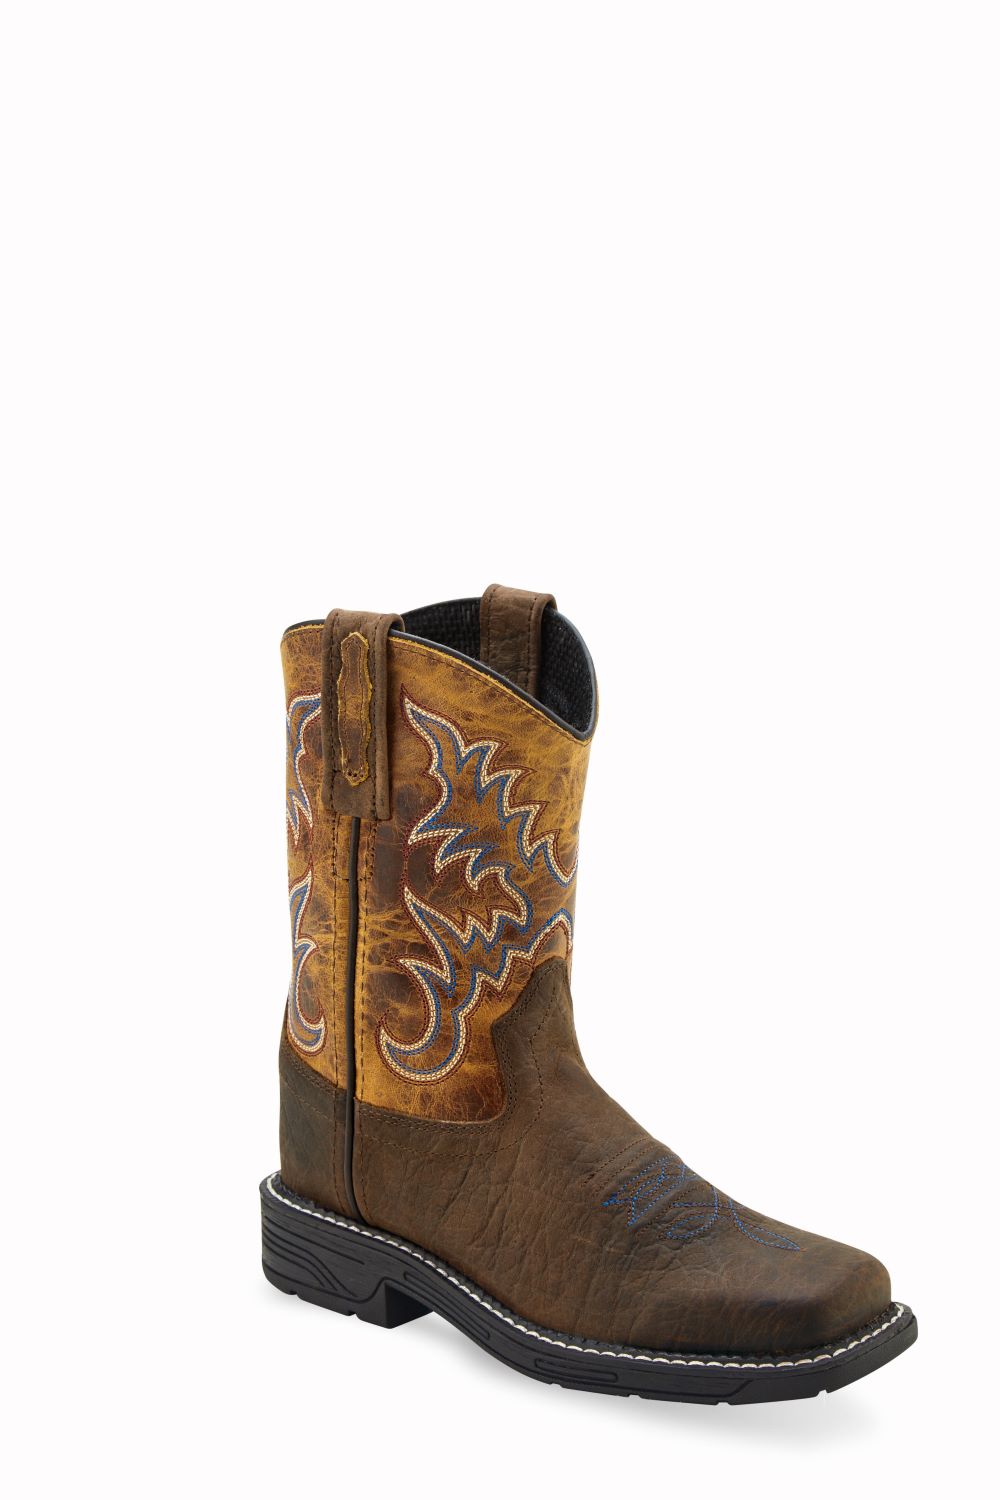 'Old West' Youth Western Square Toe - Brown / Tan